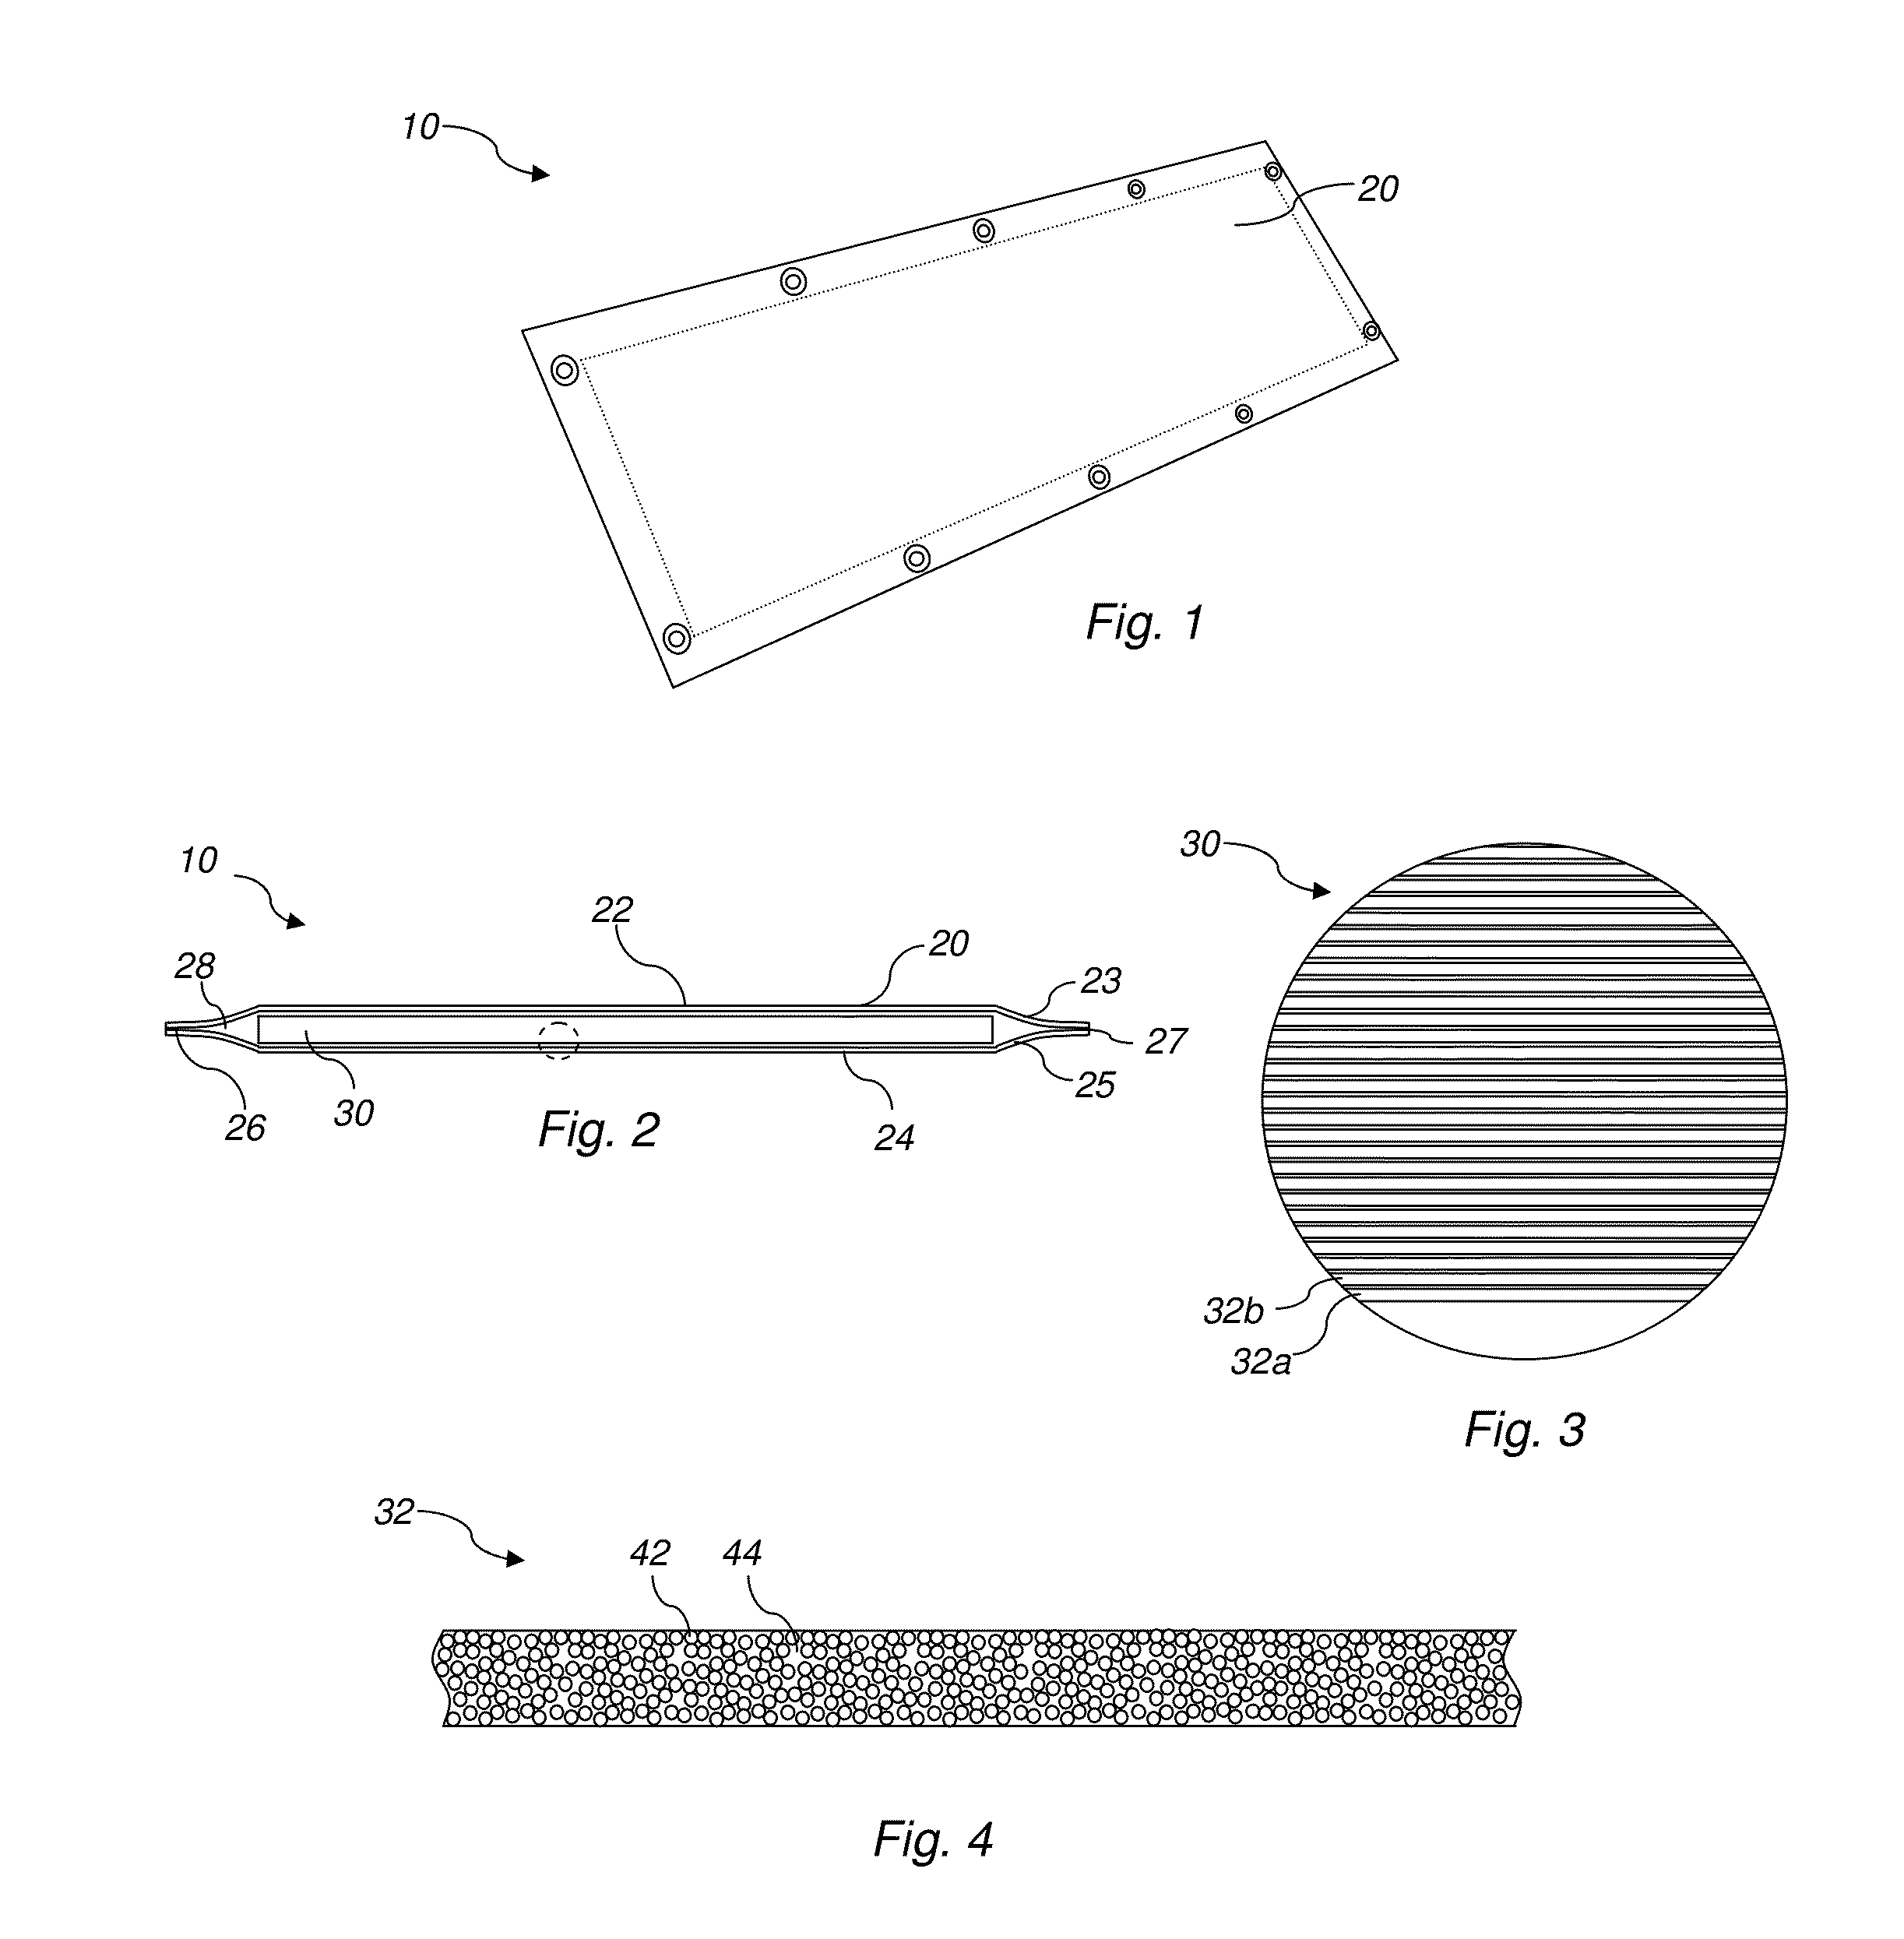 Nuclear radiation shields, shielding systems and associated methods